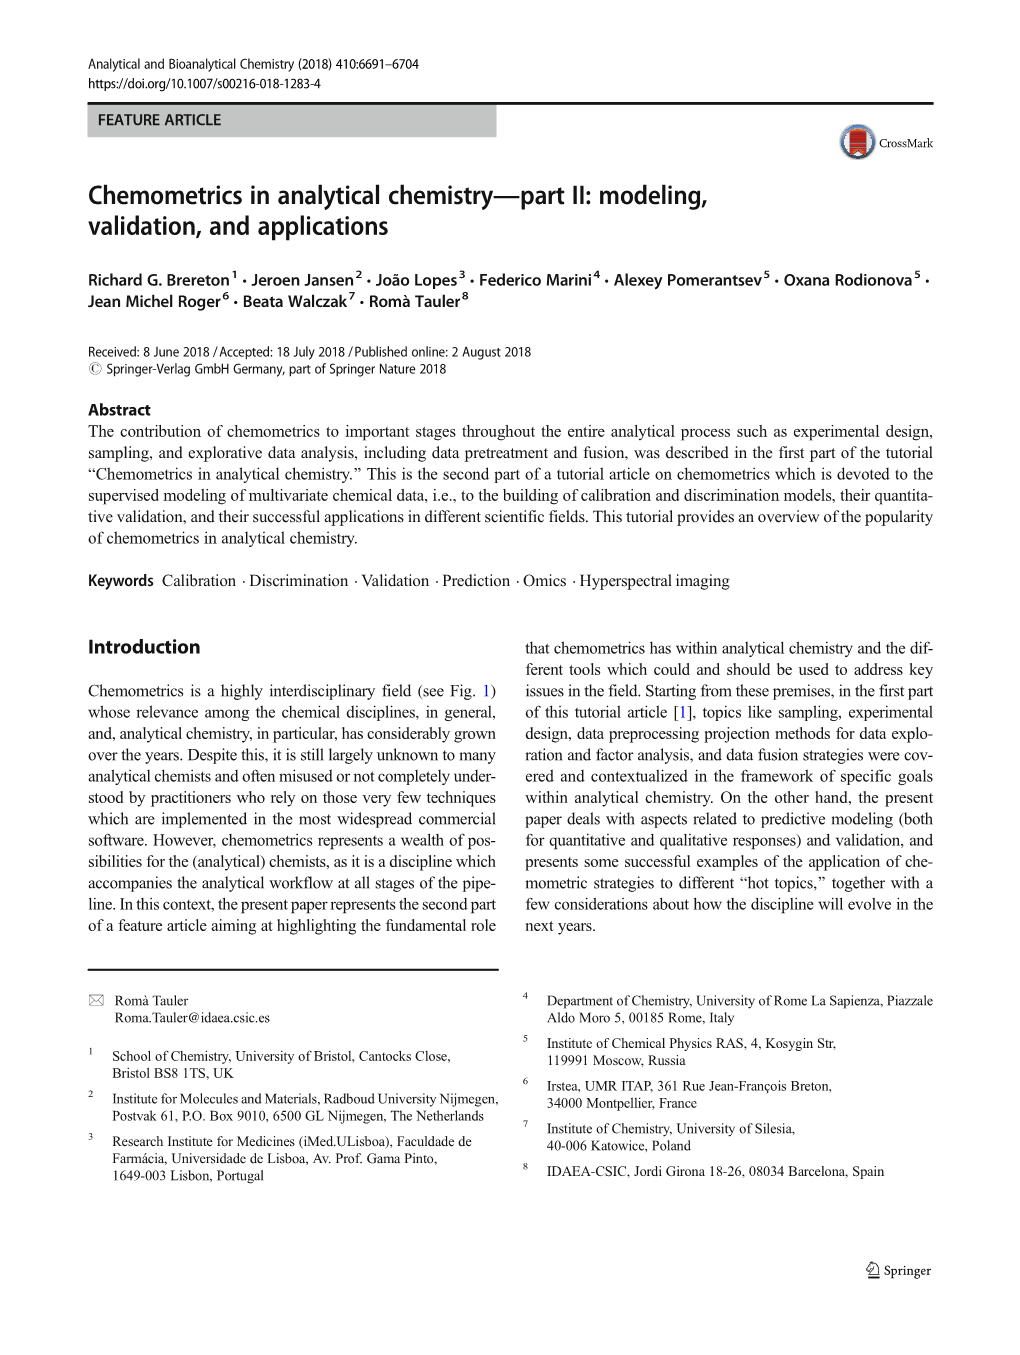 Chemometrics in Analytical Chemistry—Part II: Modeling, Validation, and Applications